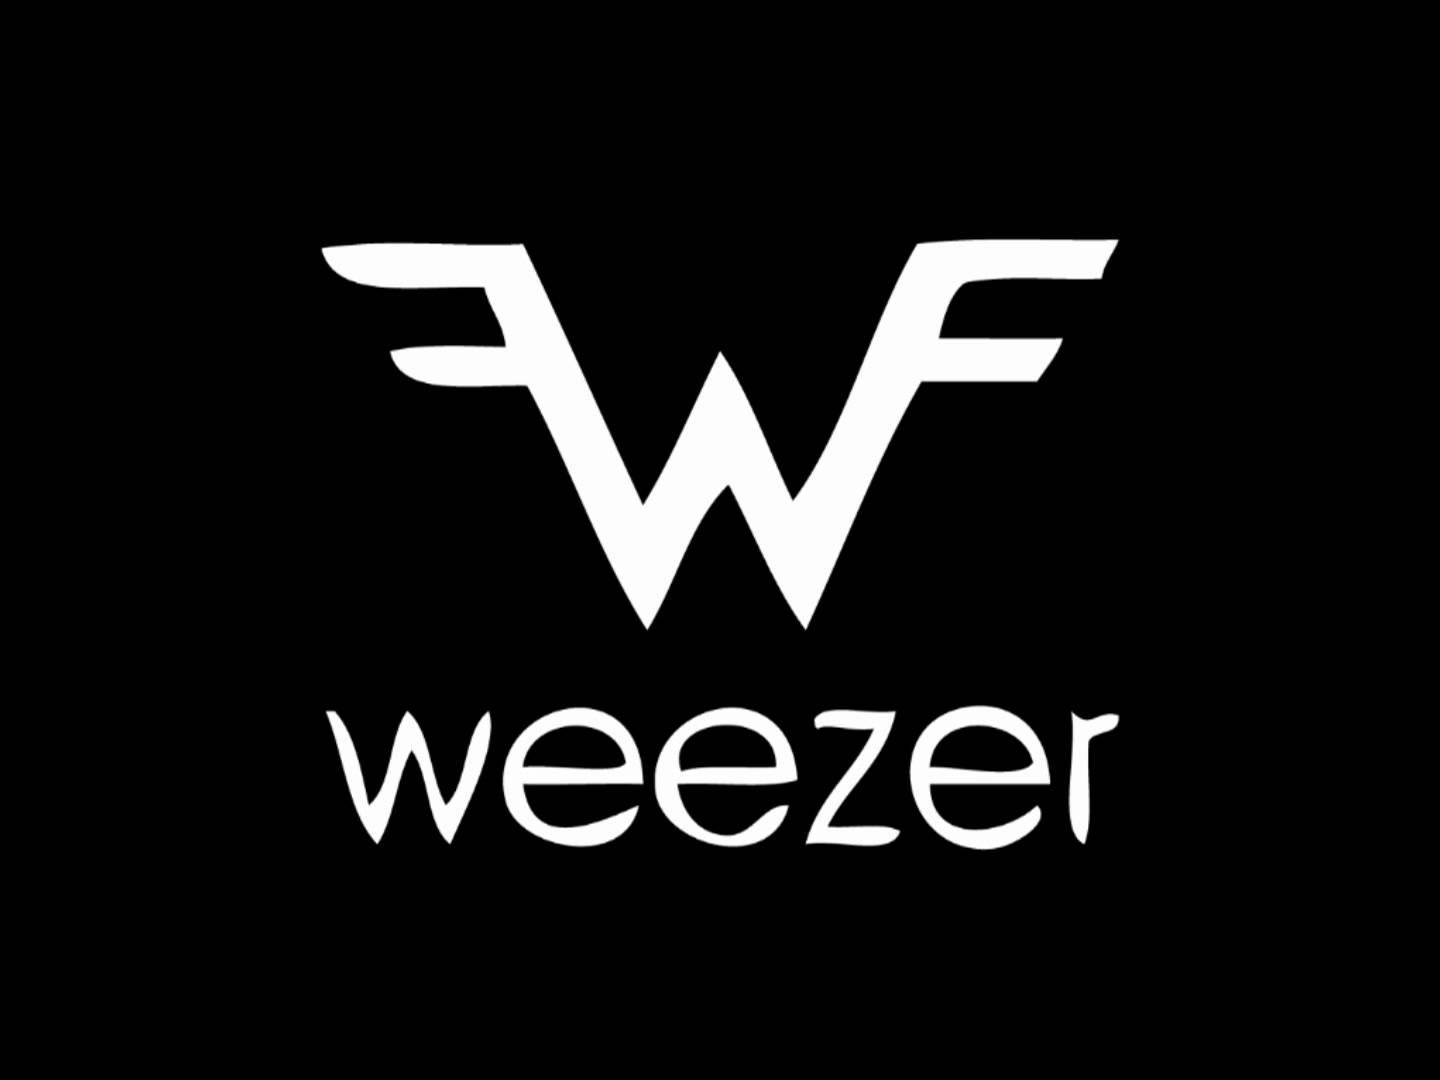 Weezer The Angel And One Wallpaper In Band